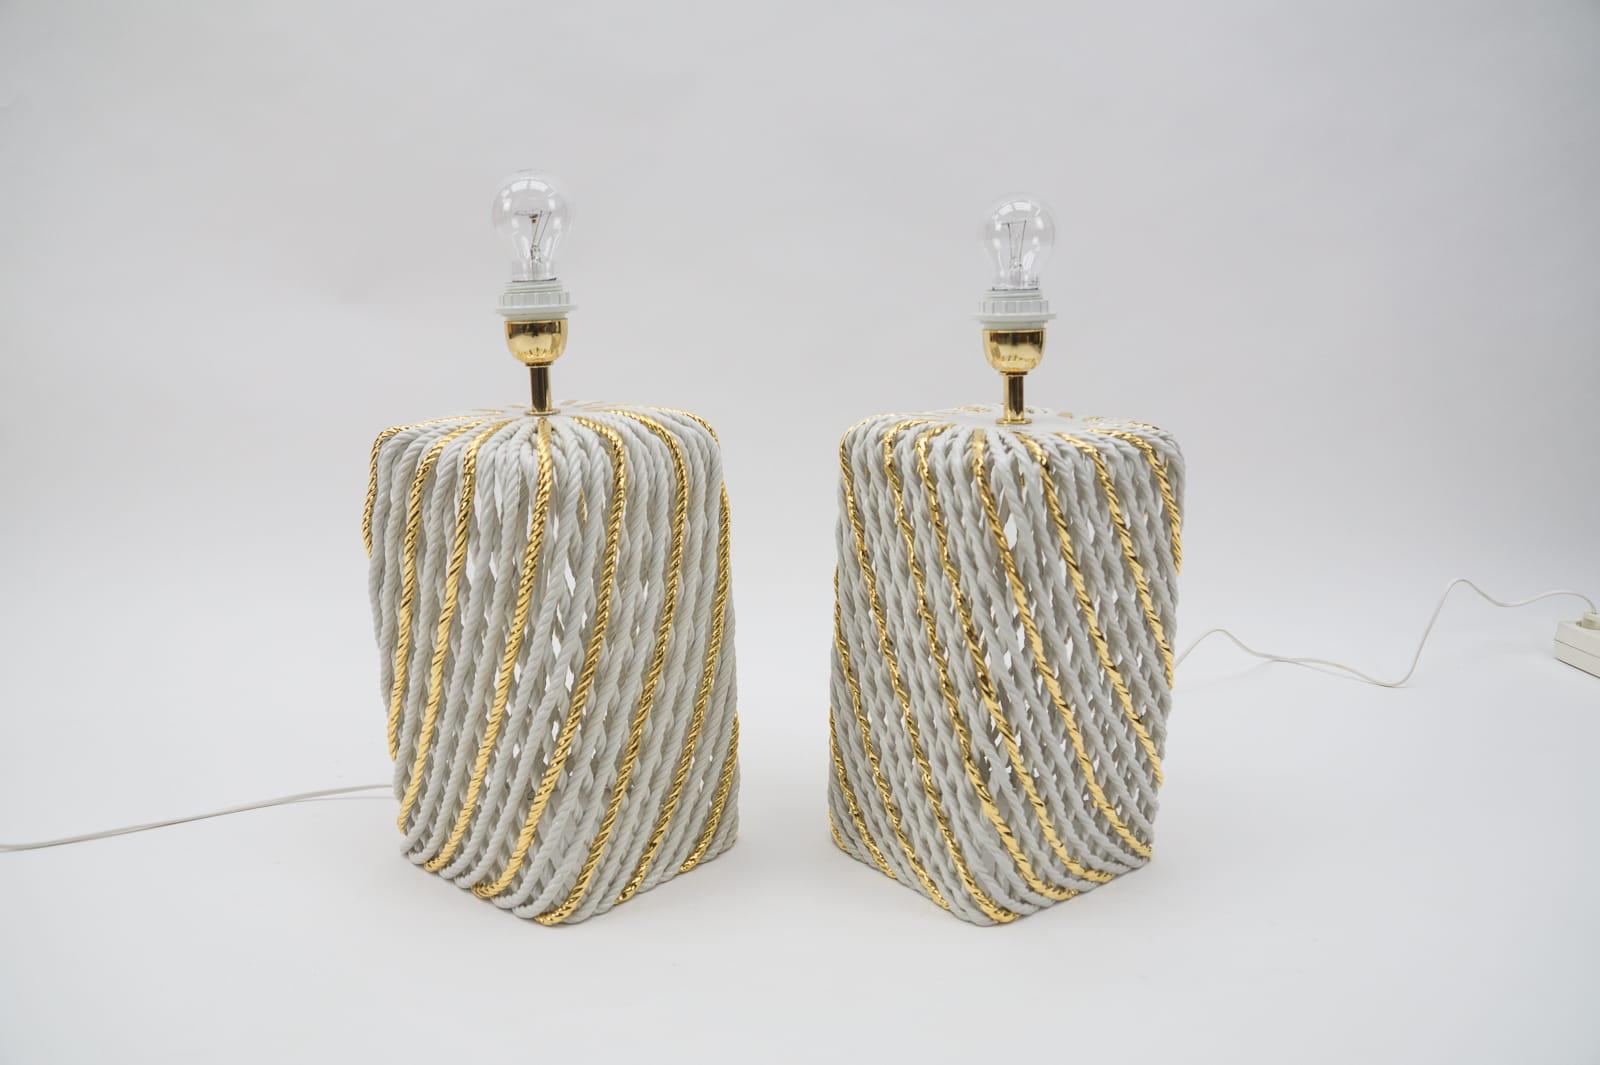 Metal Pair of Extravagant Ceramic Braid Table Lamps, 1980s Italy For Sale